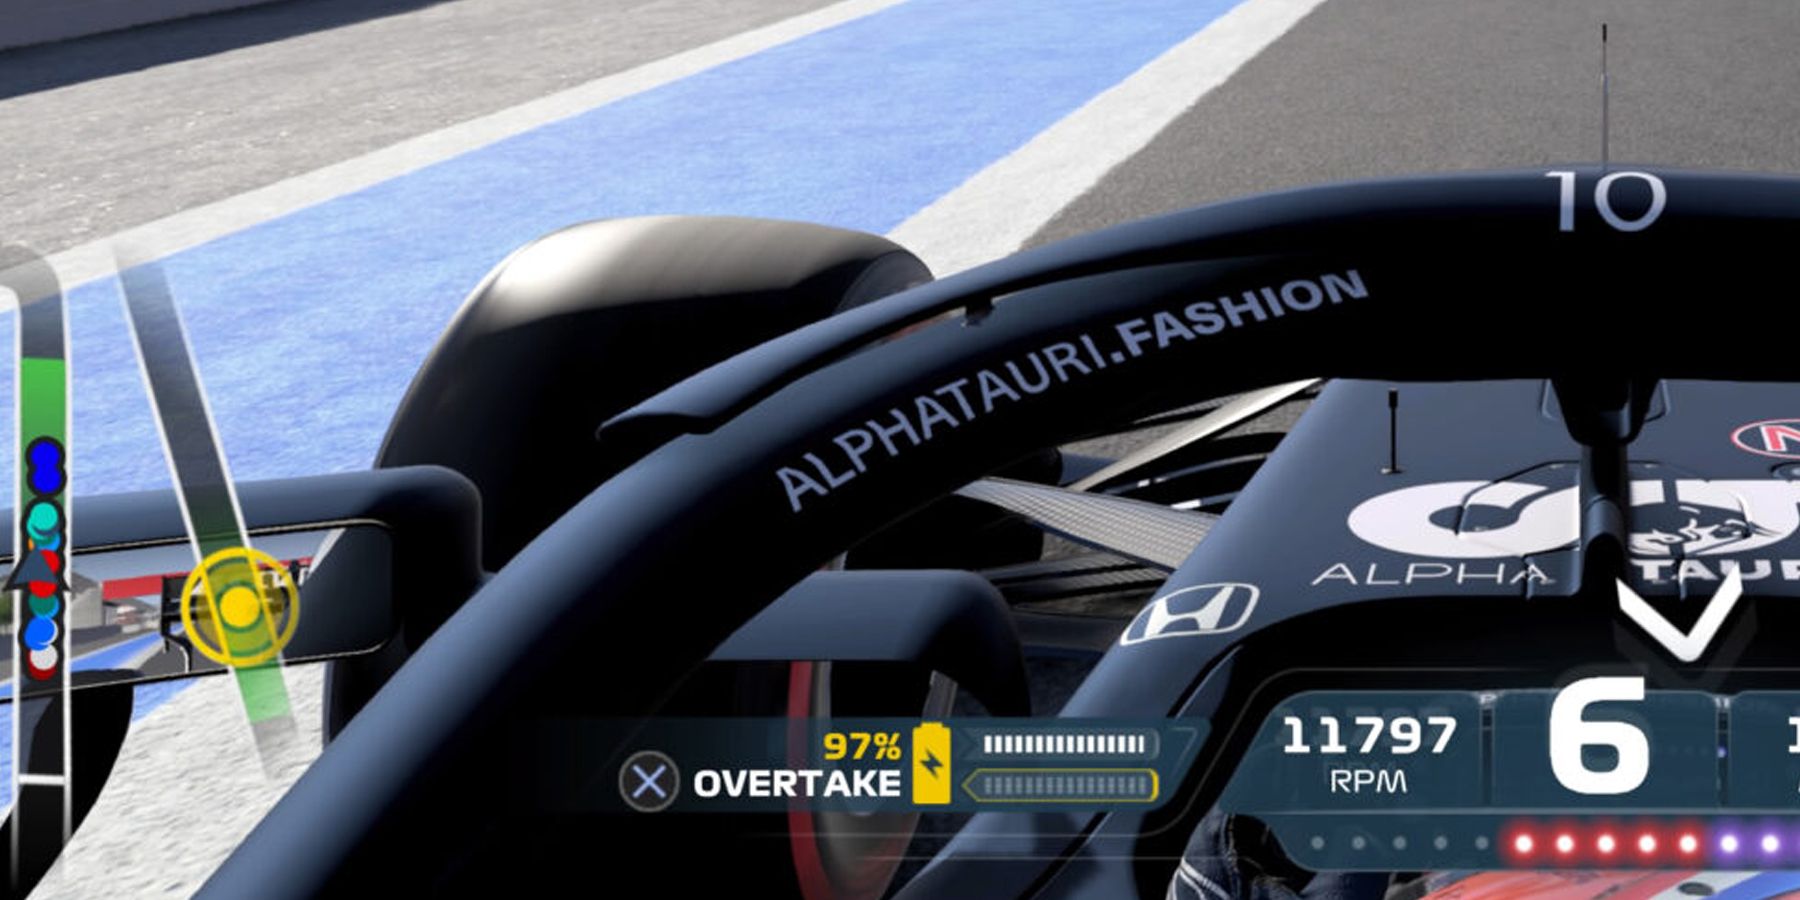 An assist setting in F1 2021 Game